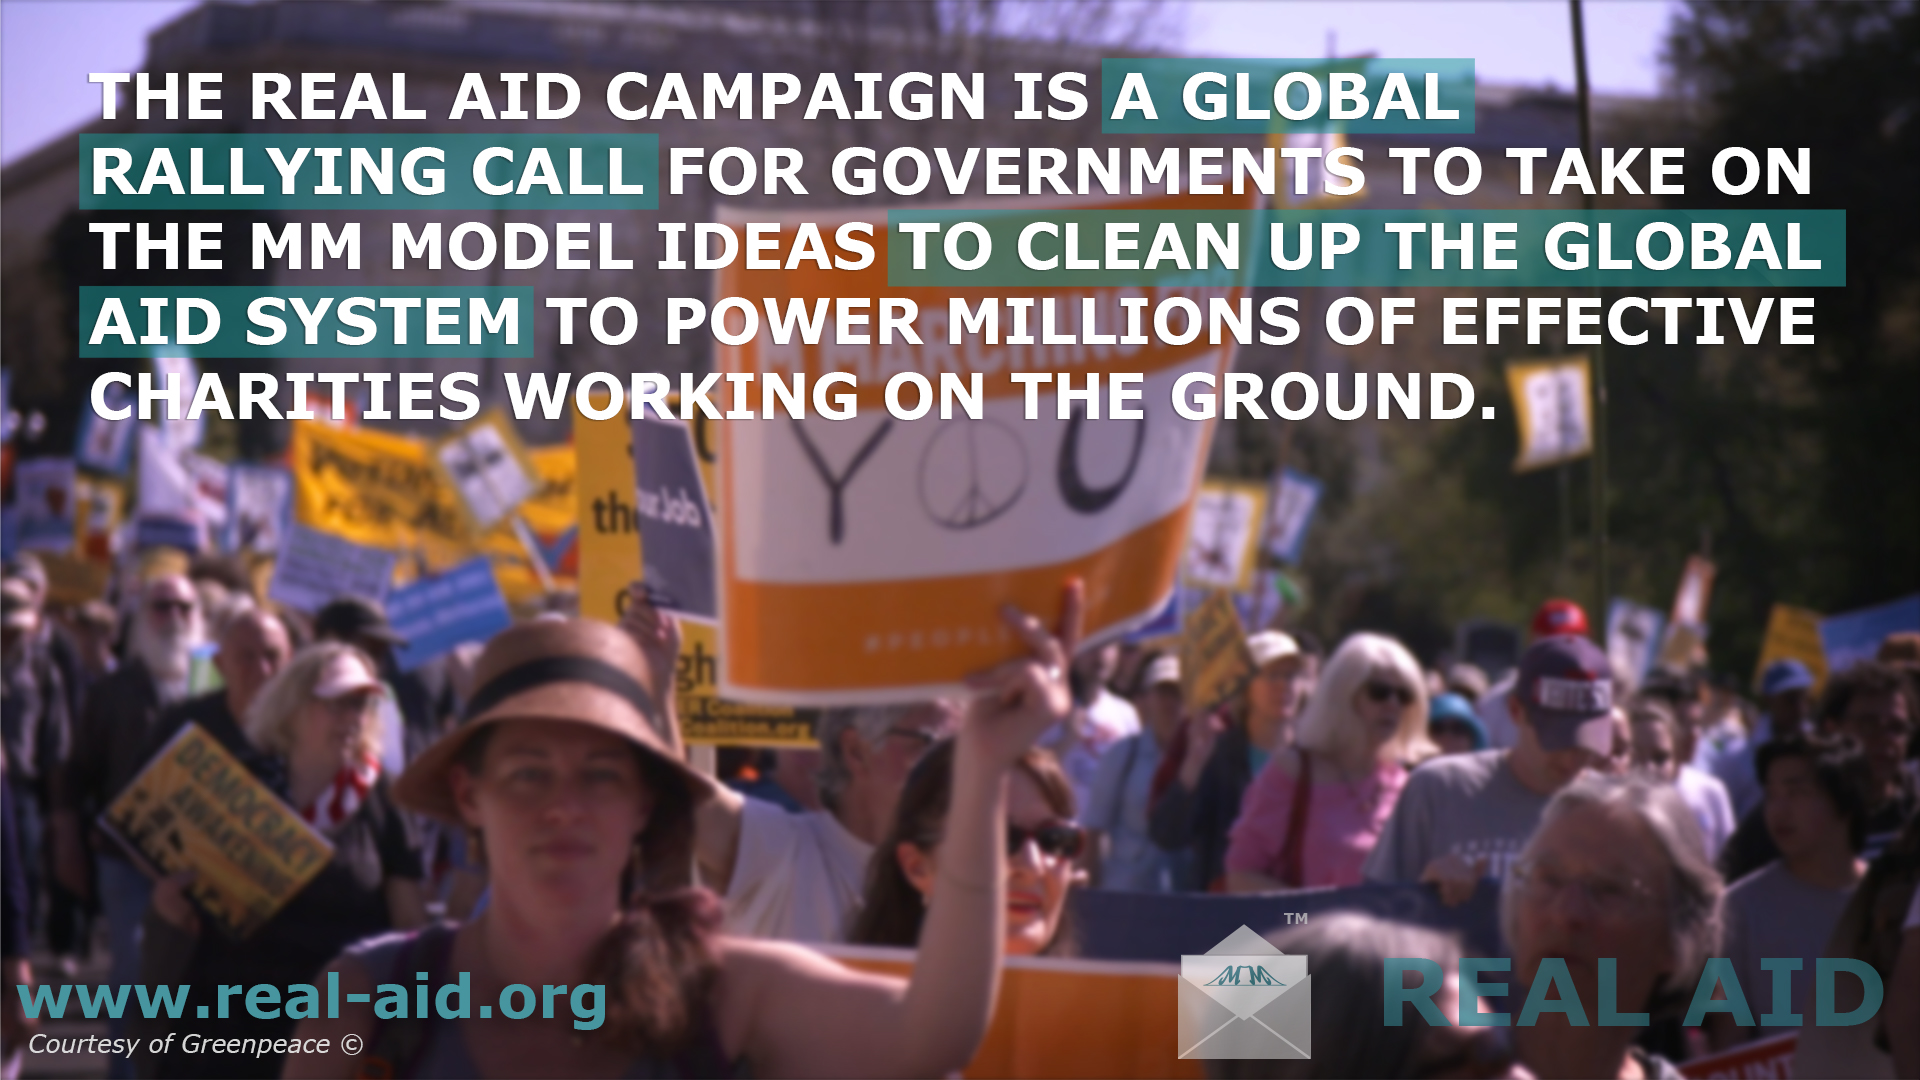 eal AId poster, text calling on reader to help clean up the global aid system, image of protestors holding signs